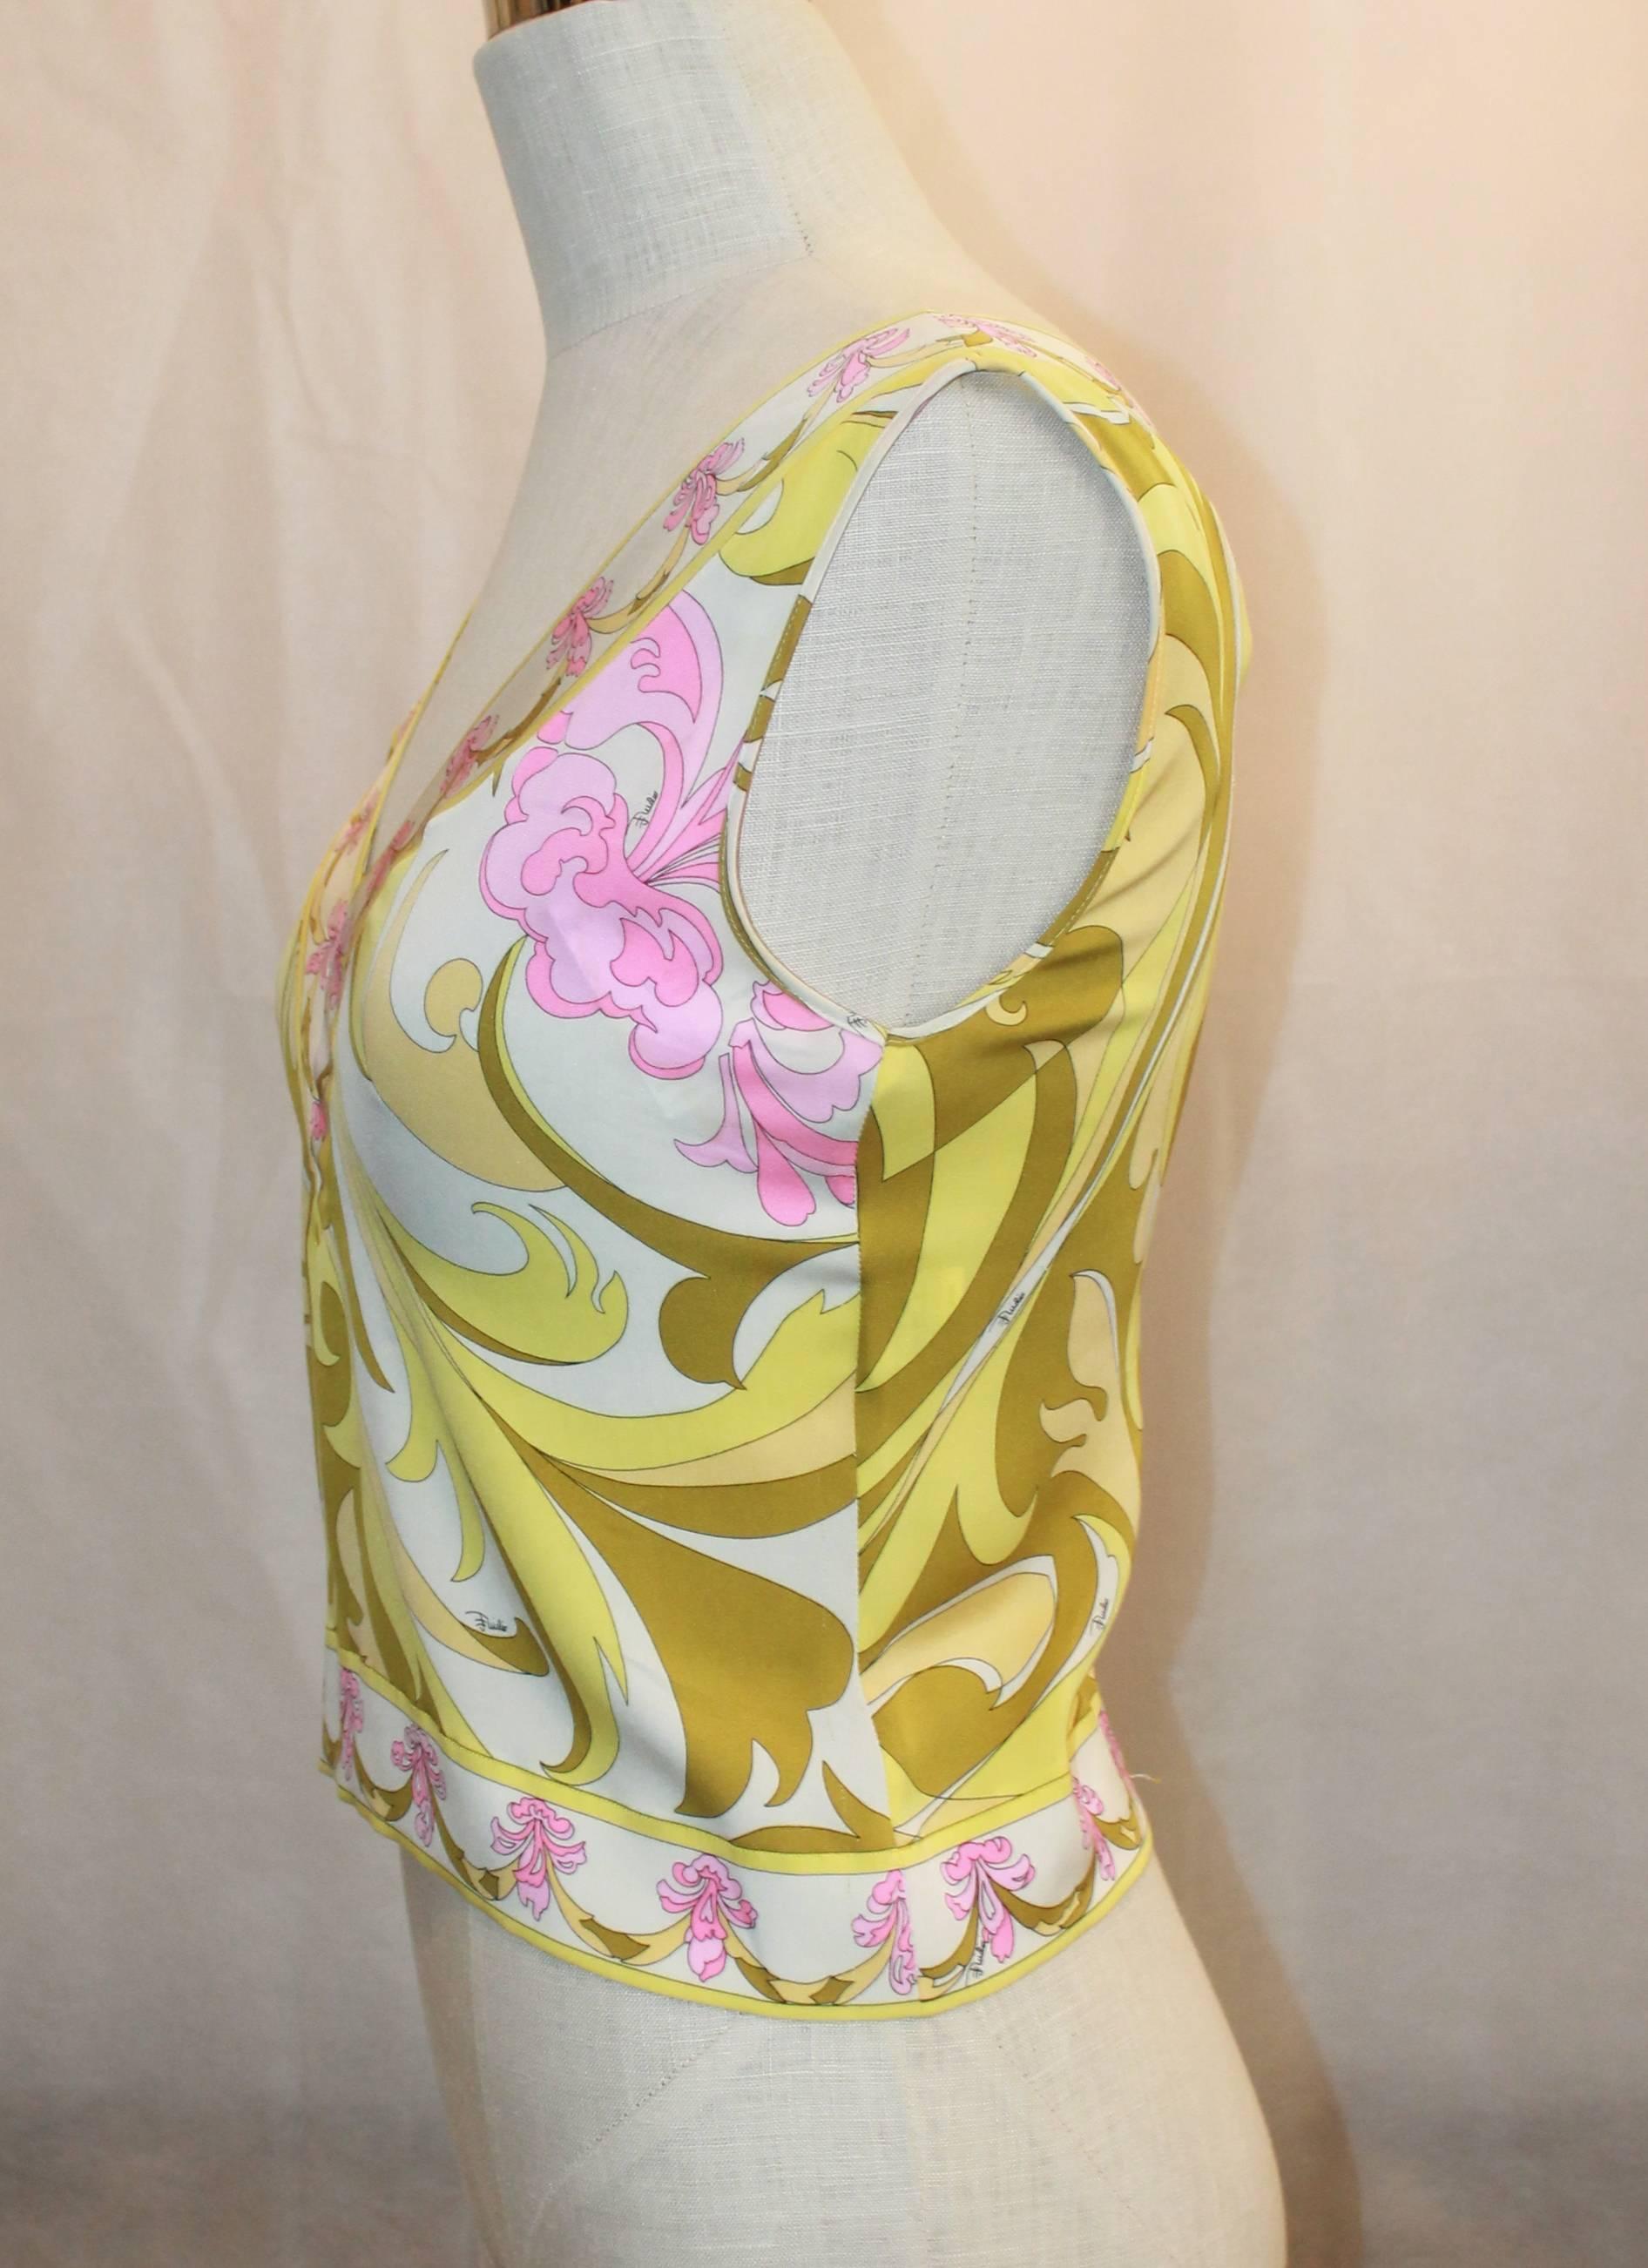 Emilio Pucci Yellow, Green & Pink Printed Sleeveless Top - 4 - 1980's This top is in excellent vintage condition with minor wear, mainly small pulls. It features a v-neck, floral printed trim, and no zipper.

Measurements:
Bust- 34